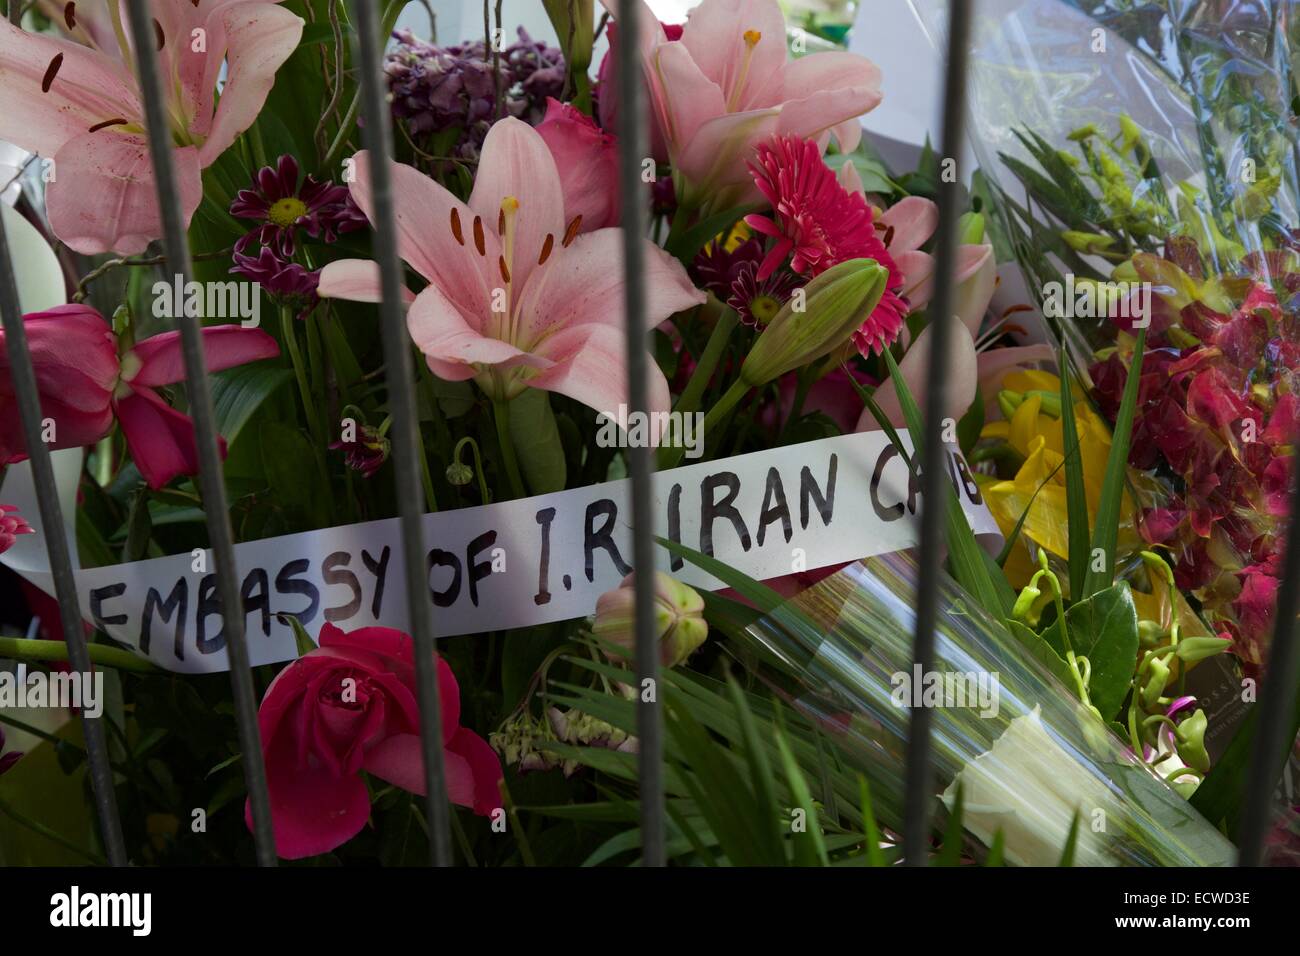 Martin Place, Sydney, Australia. 20 December 2014. Flowers left by the Embassy of the Islamic Republic of Iran in memory of the two hostage victims of the Sydney siege Katrina Dawson and Tori Johnson. Copyright Credit:  2014 Richard Milnes/Alamy Live News. Stock Photo